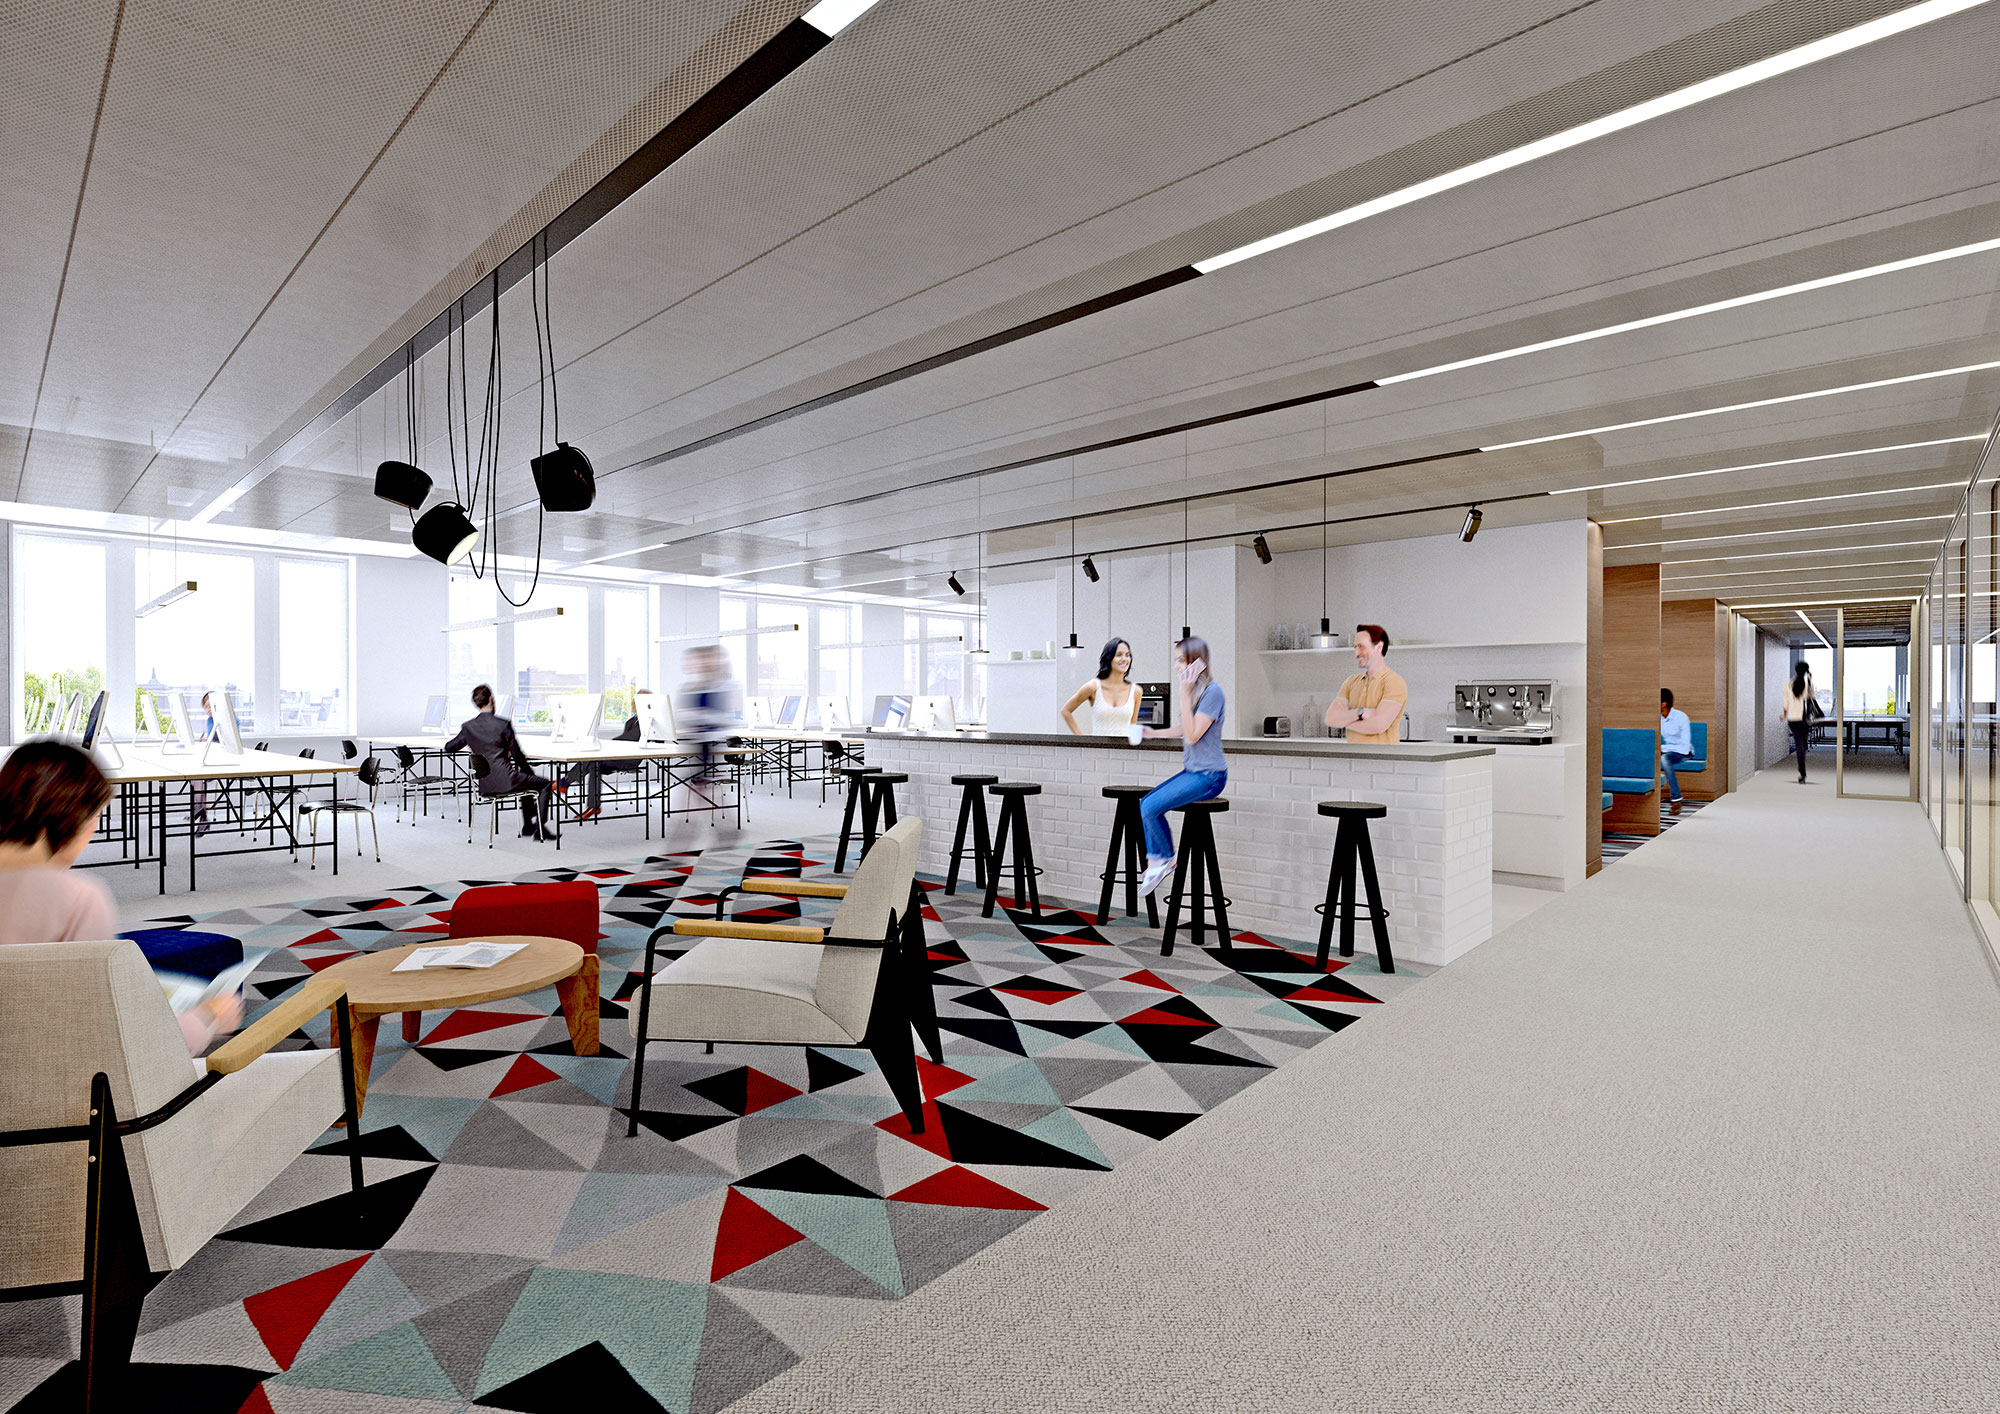 KARL offers highly flexible office space for individual design.